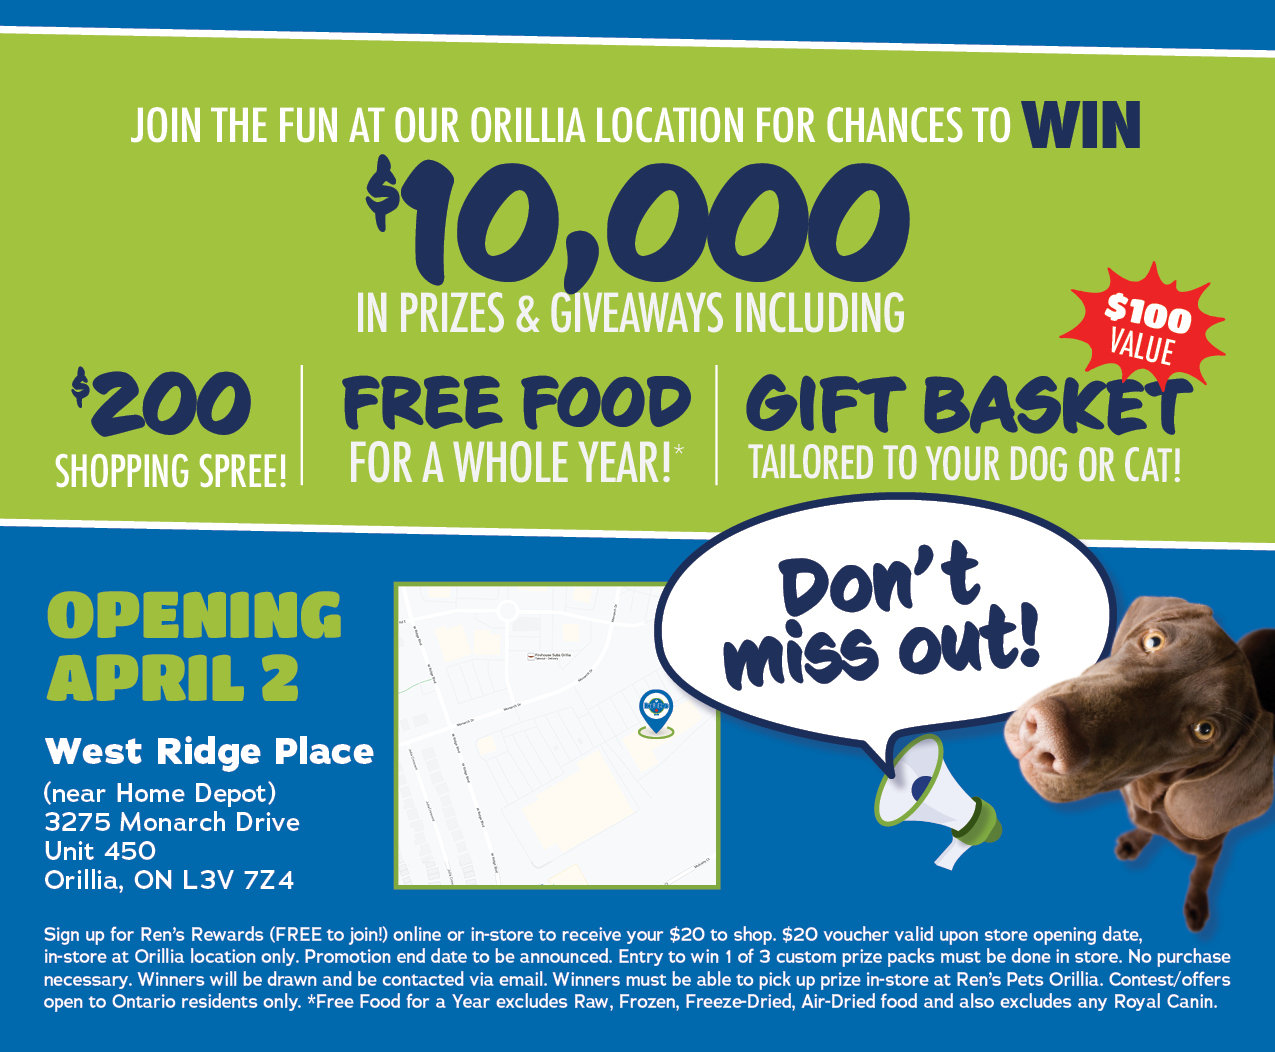 Join the fun at our Orillia location for a chance to win $10000 in prices and giveaways